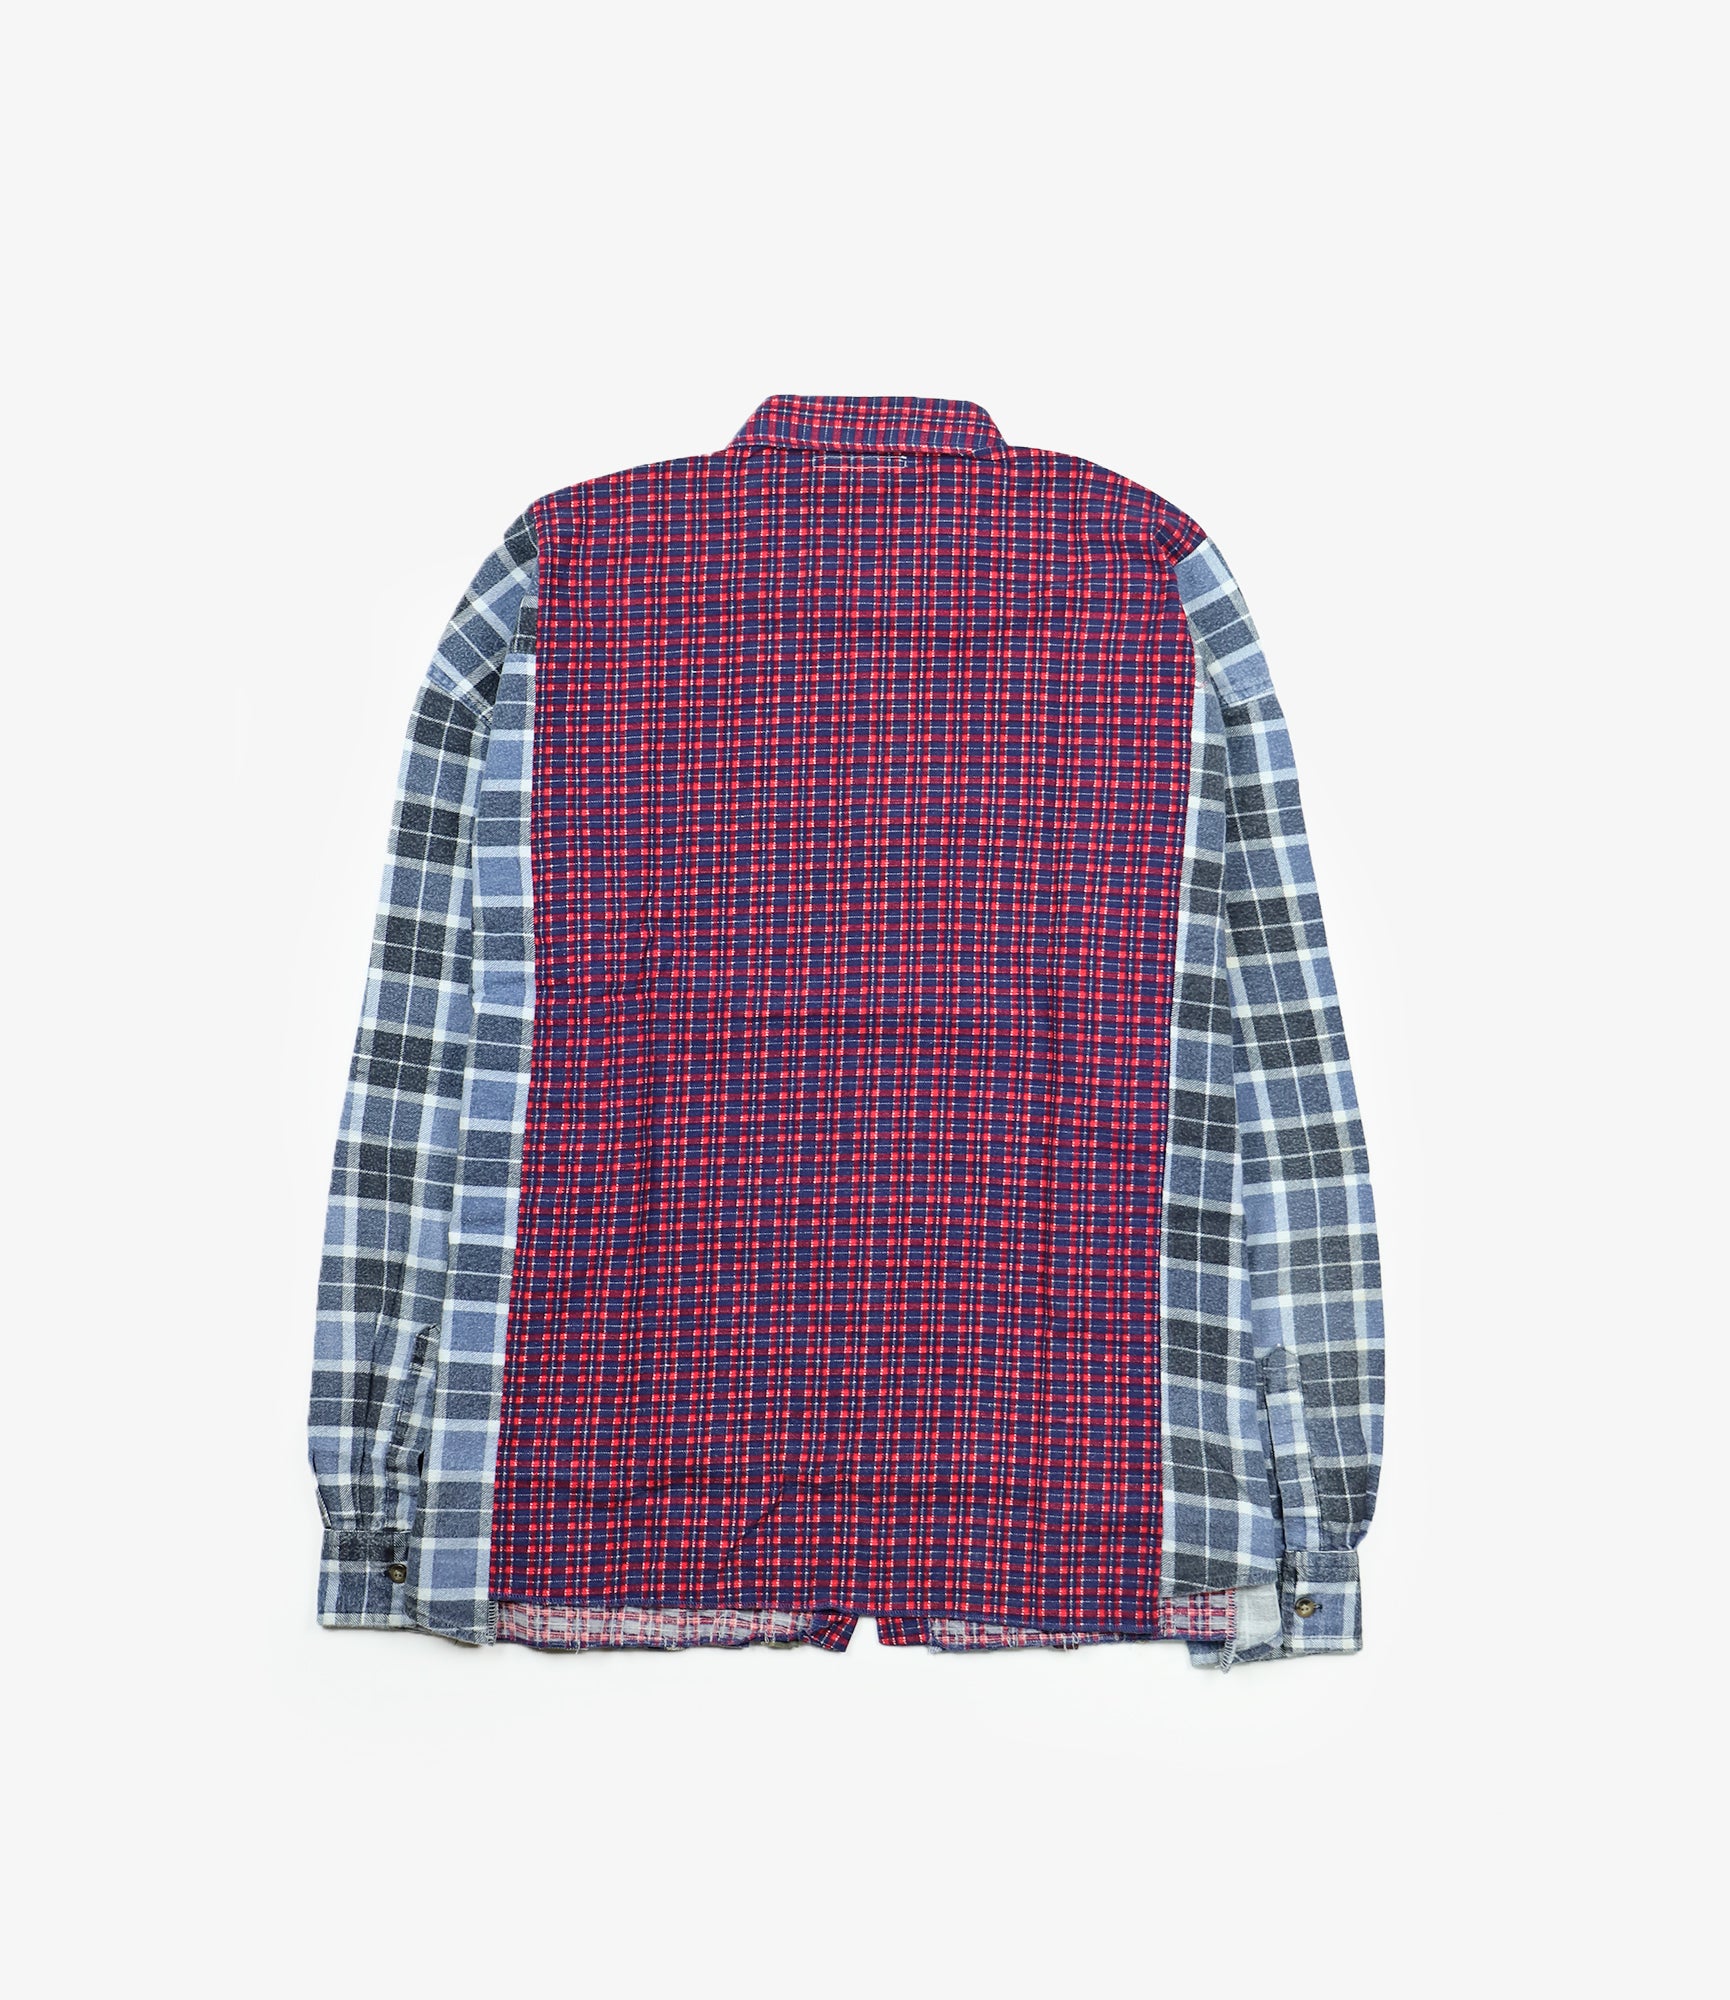 Rebuild by Needles Flannel Shirt - Ribbon Wide Shirt - Assorted